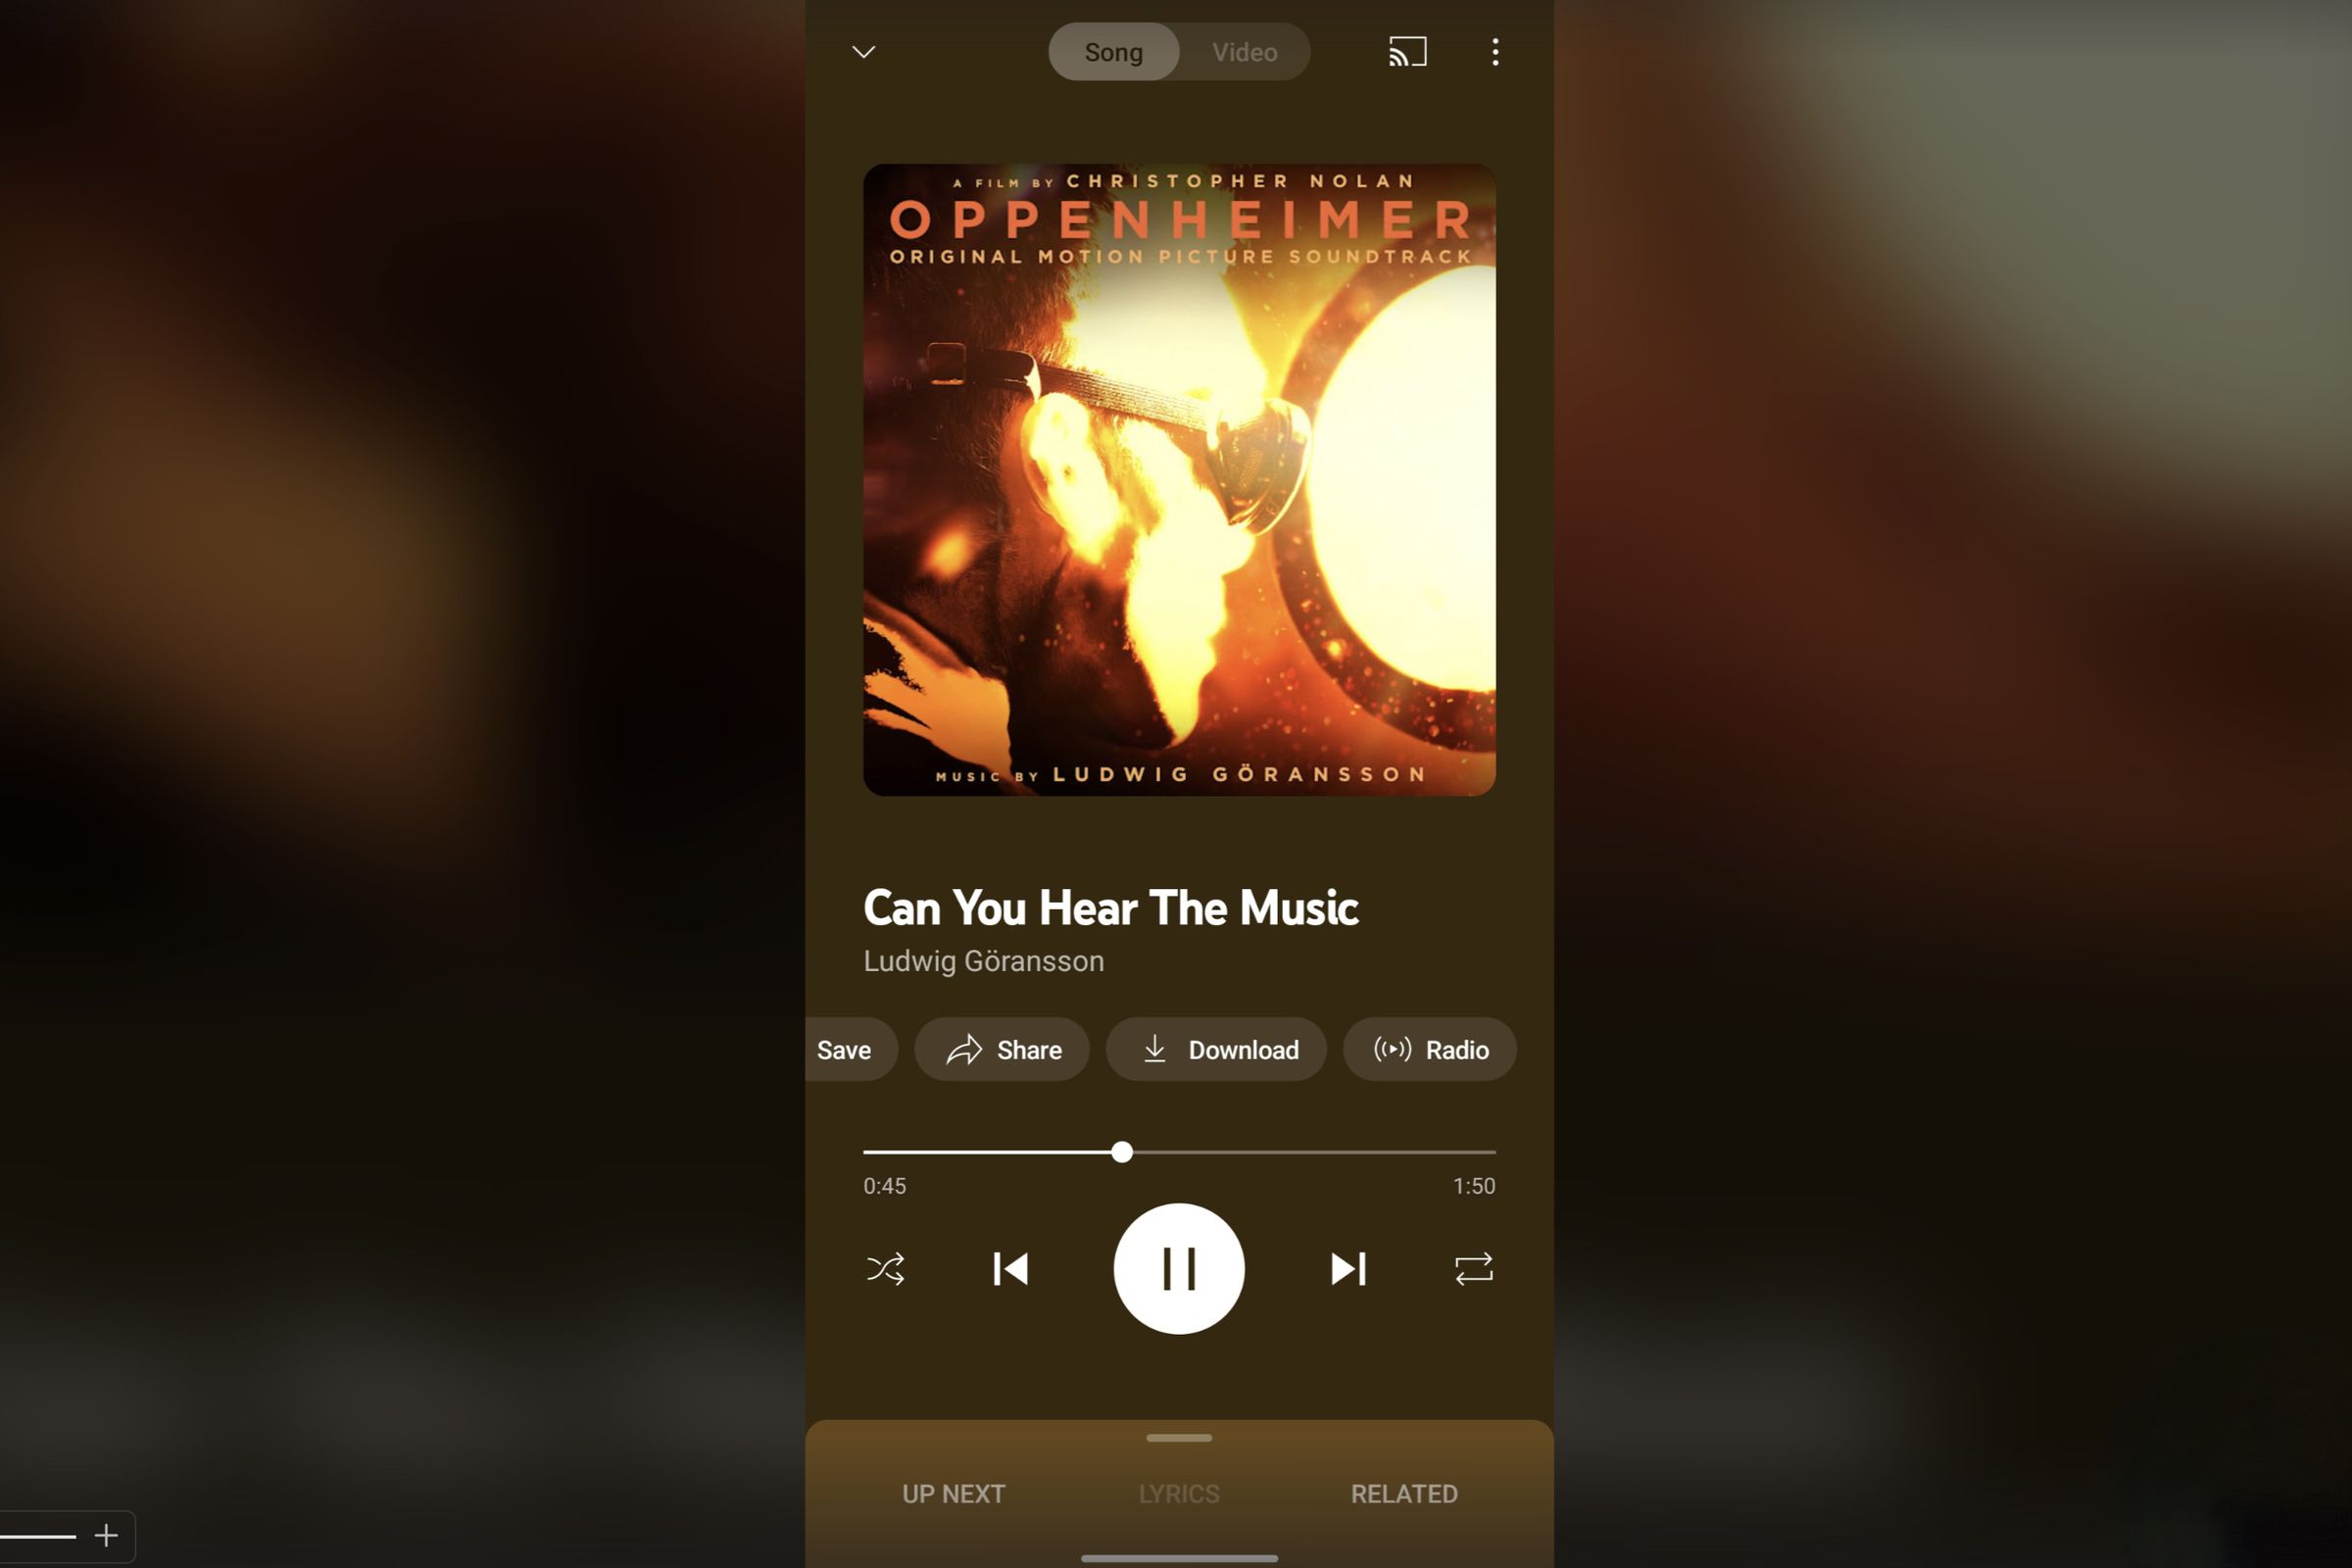 screenshot of youtube music now playing, playing oppenhiemer soundtrack titled “can you hear the music,” and there’s new buttons above the progress bar.